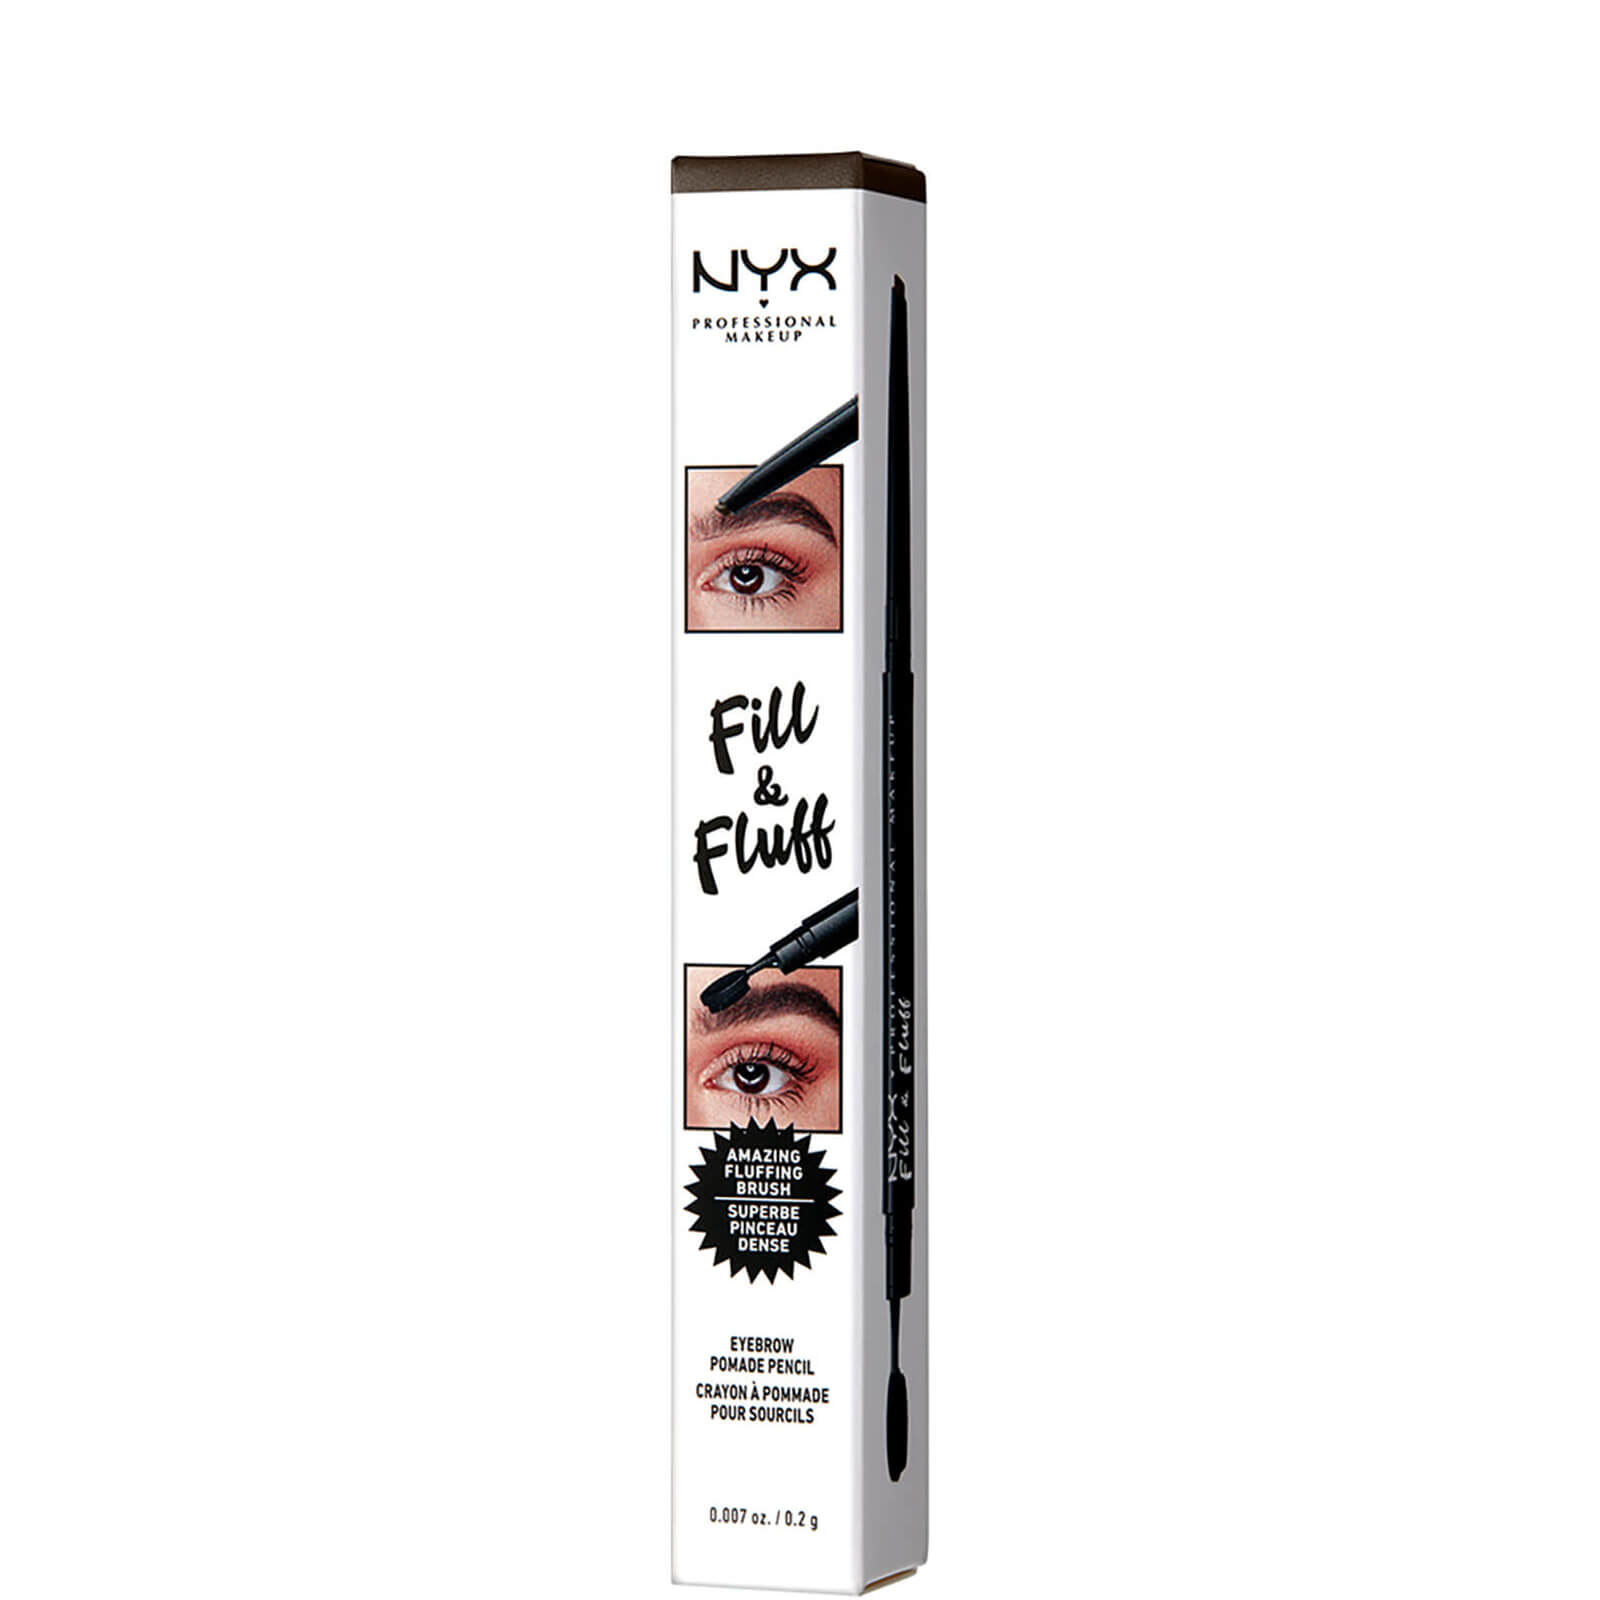 NYX Professional Makeup Fill and Fluff Eyebrow Pomade Pencil 0.2g (Various Shades) - Espresso von NYX Professional Makeup